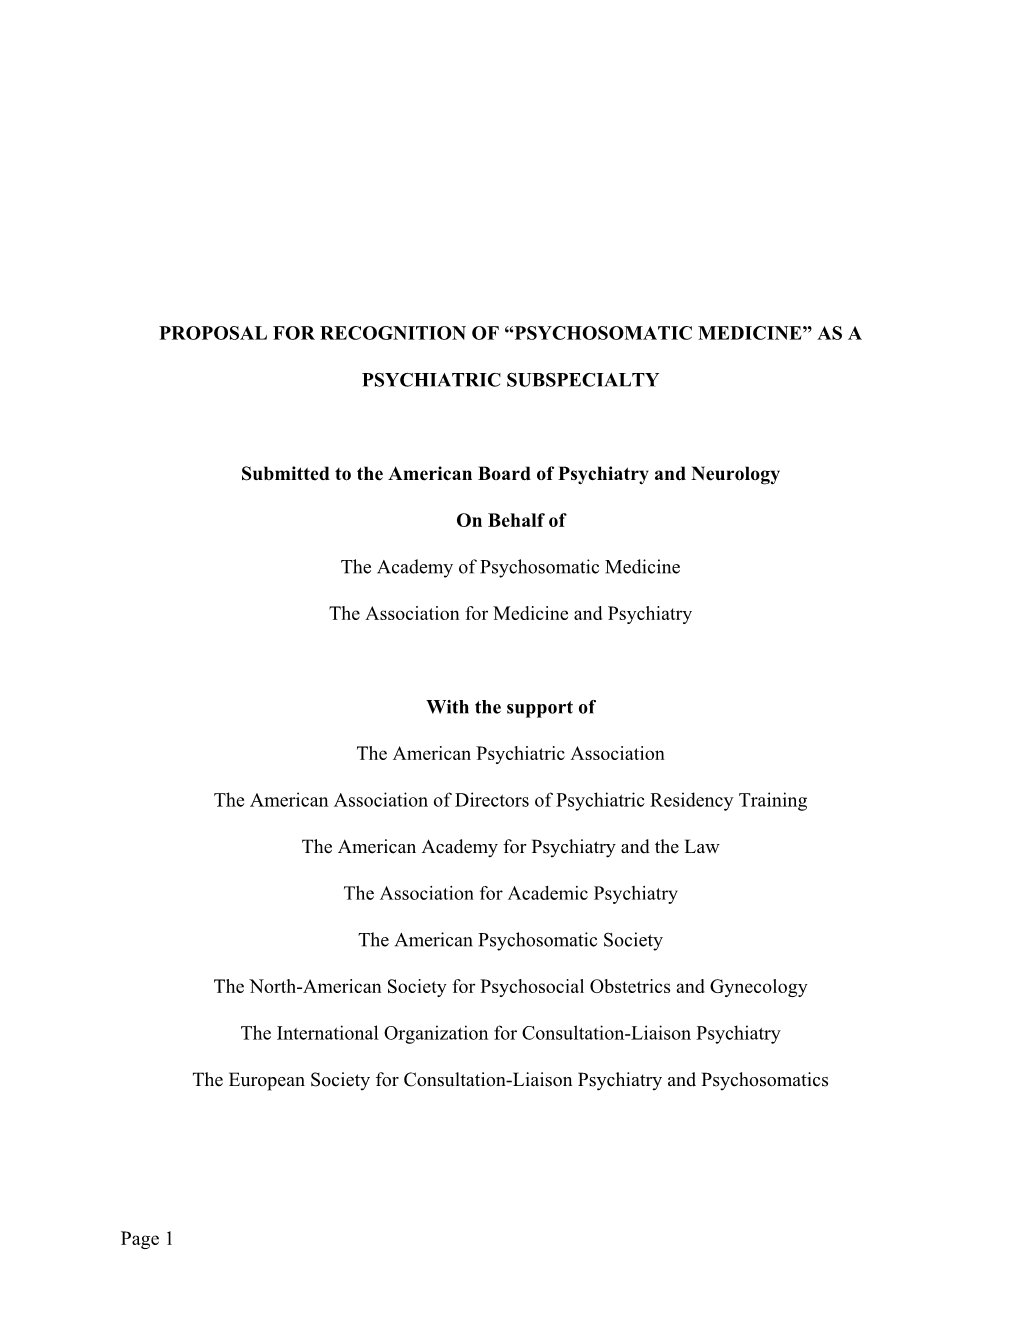 Proposal for Recognition of “Psychosomatic Medicine” As A